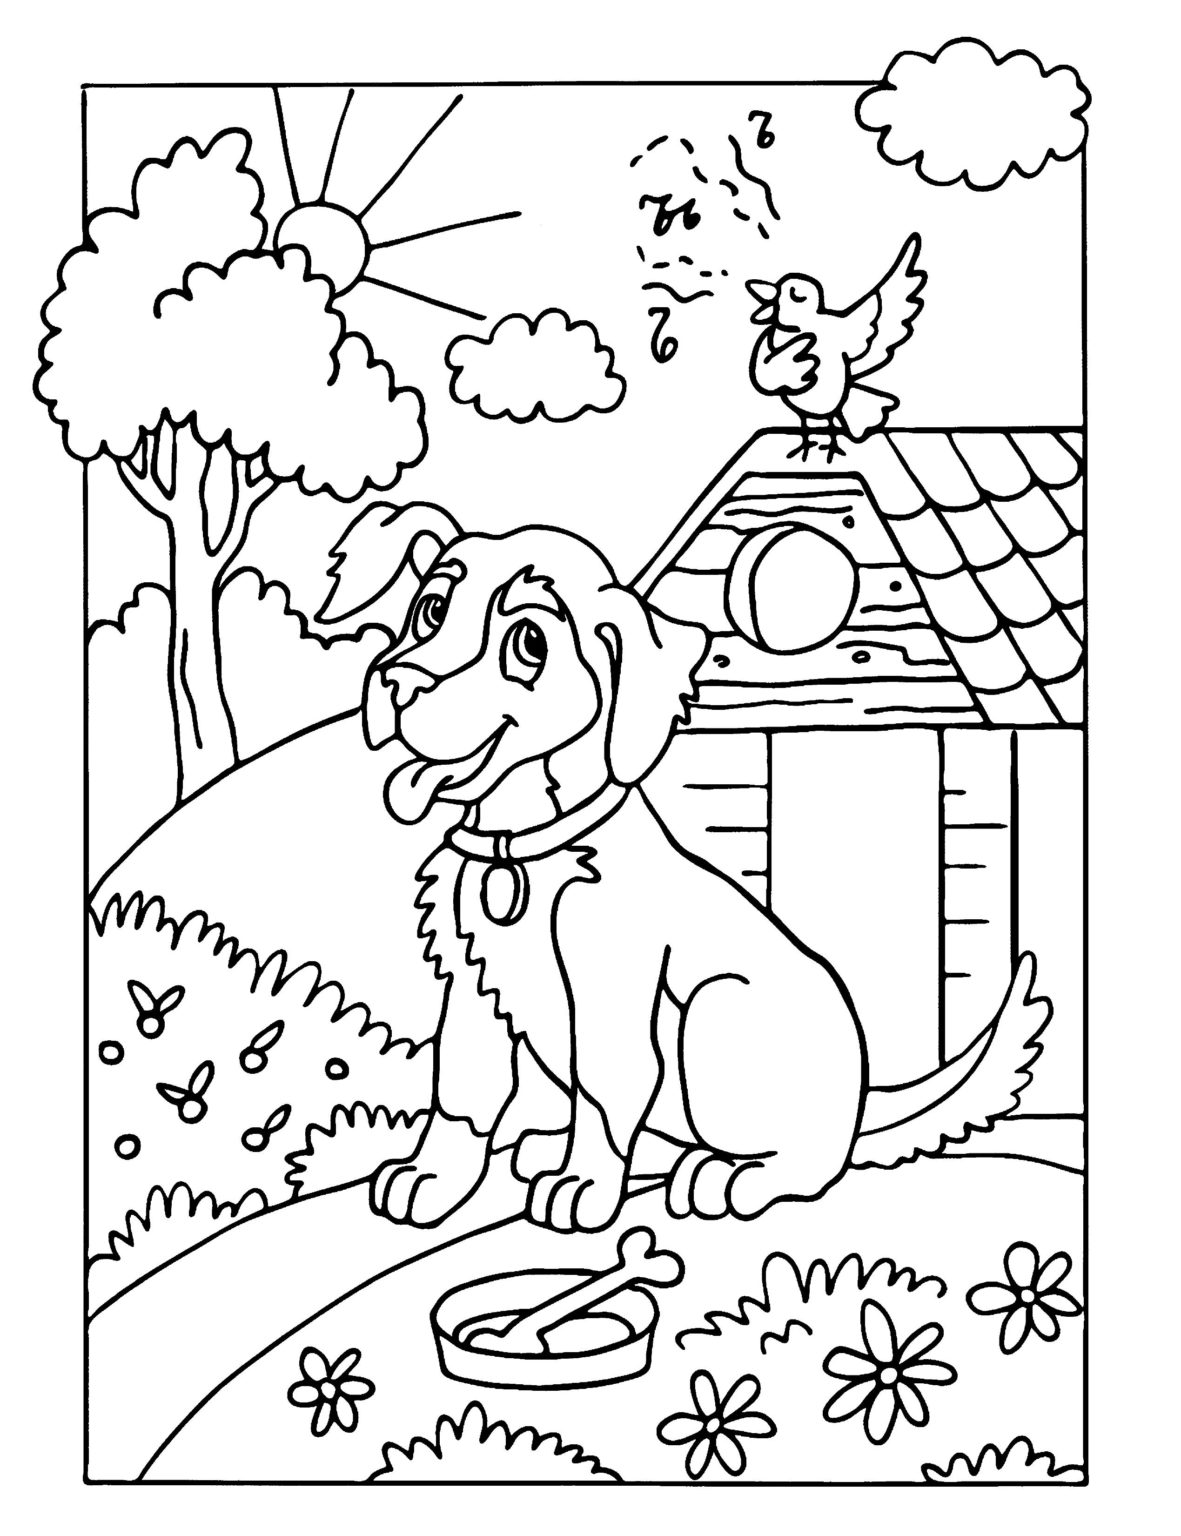 Auditor’s Office announces fifth dog license coloring contest for ...